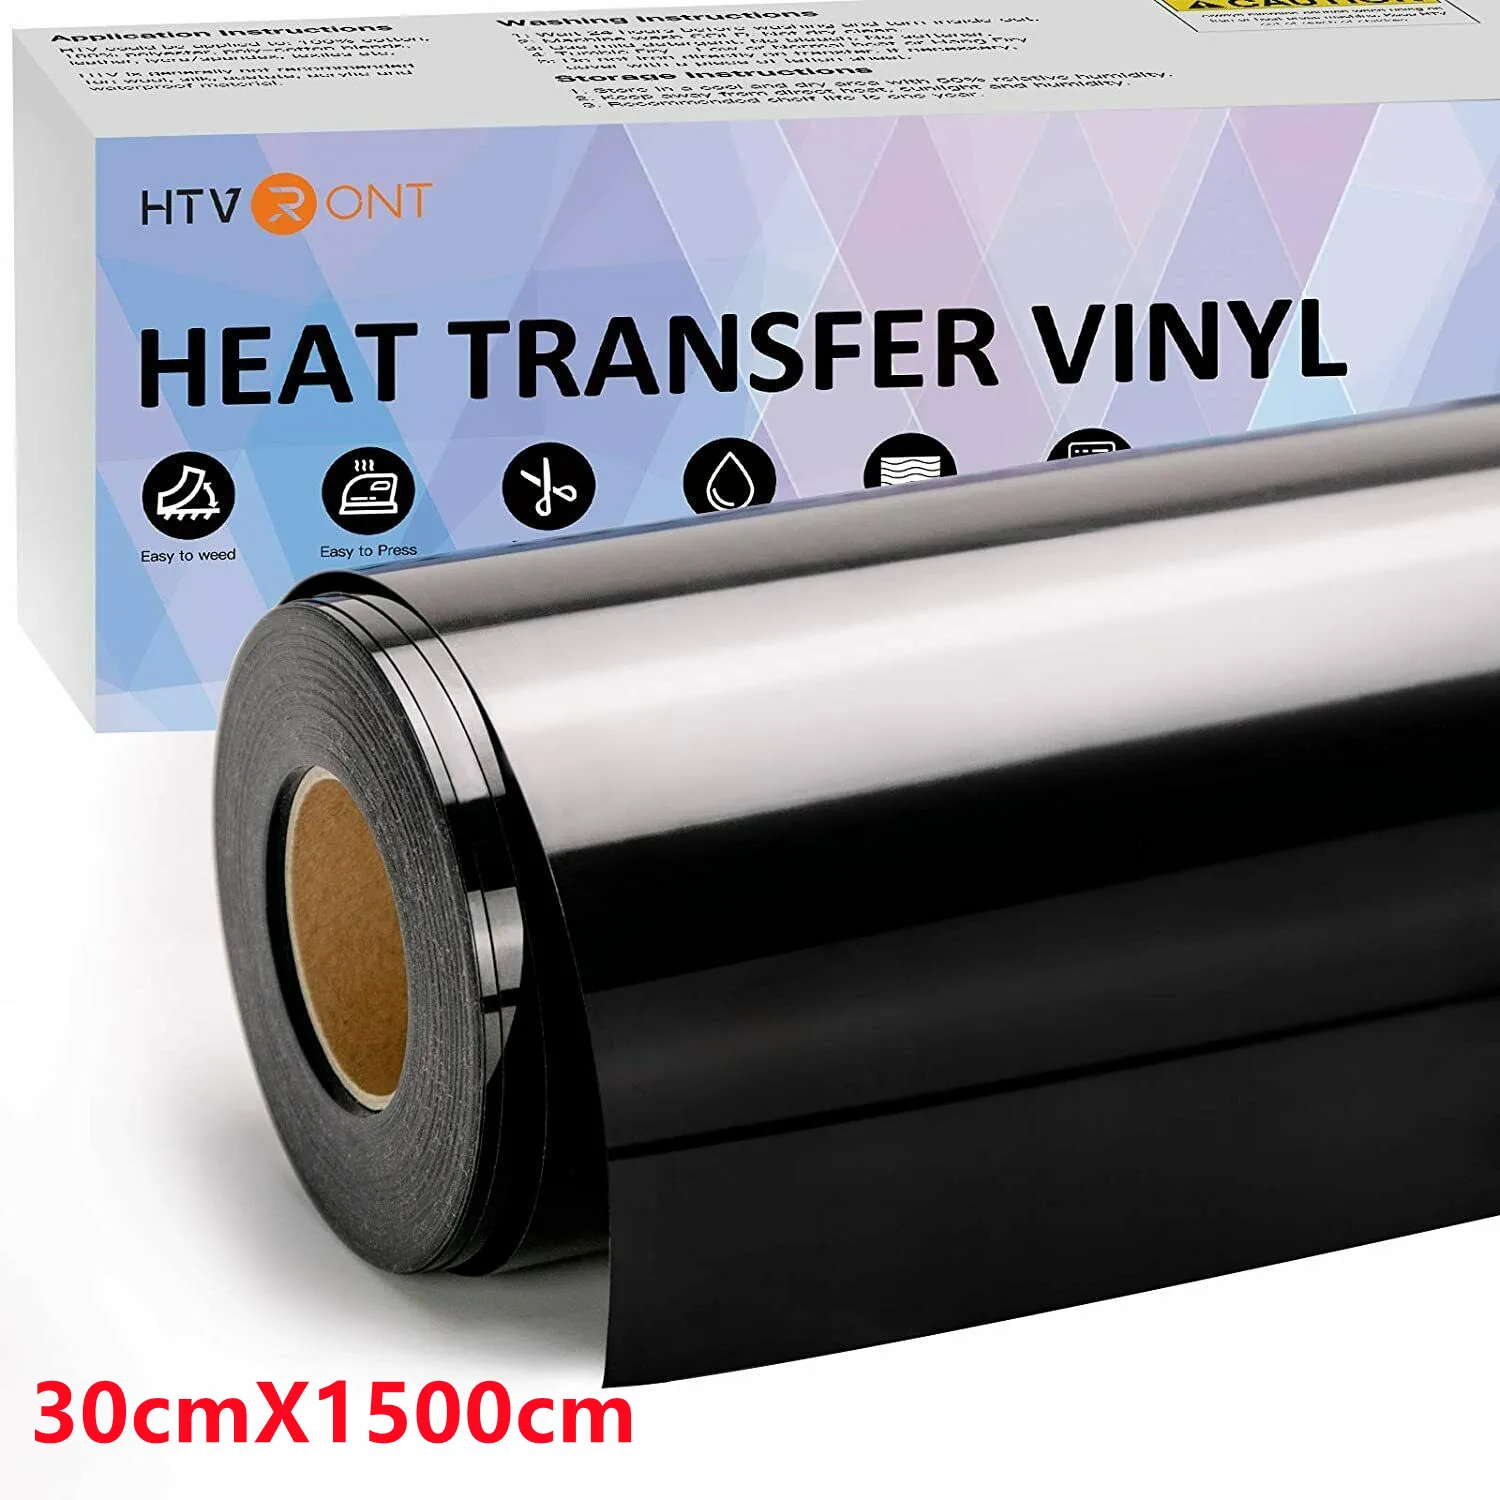 HTVRONT 12"X50ft/30x1500cm Heat Transfer Vinyl Roll for T-shirt Stickers Craft Iron on DIY HTV Film For Printing Clothing